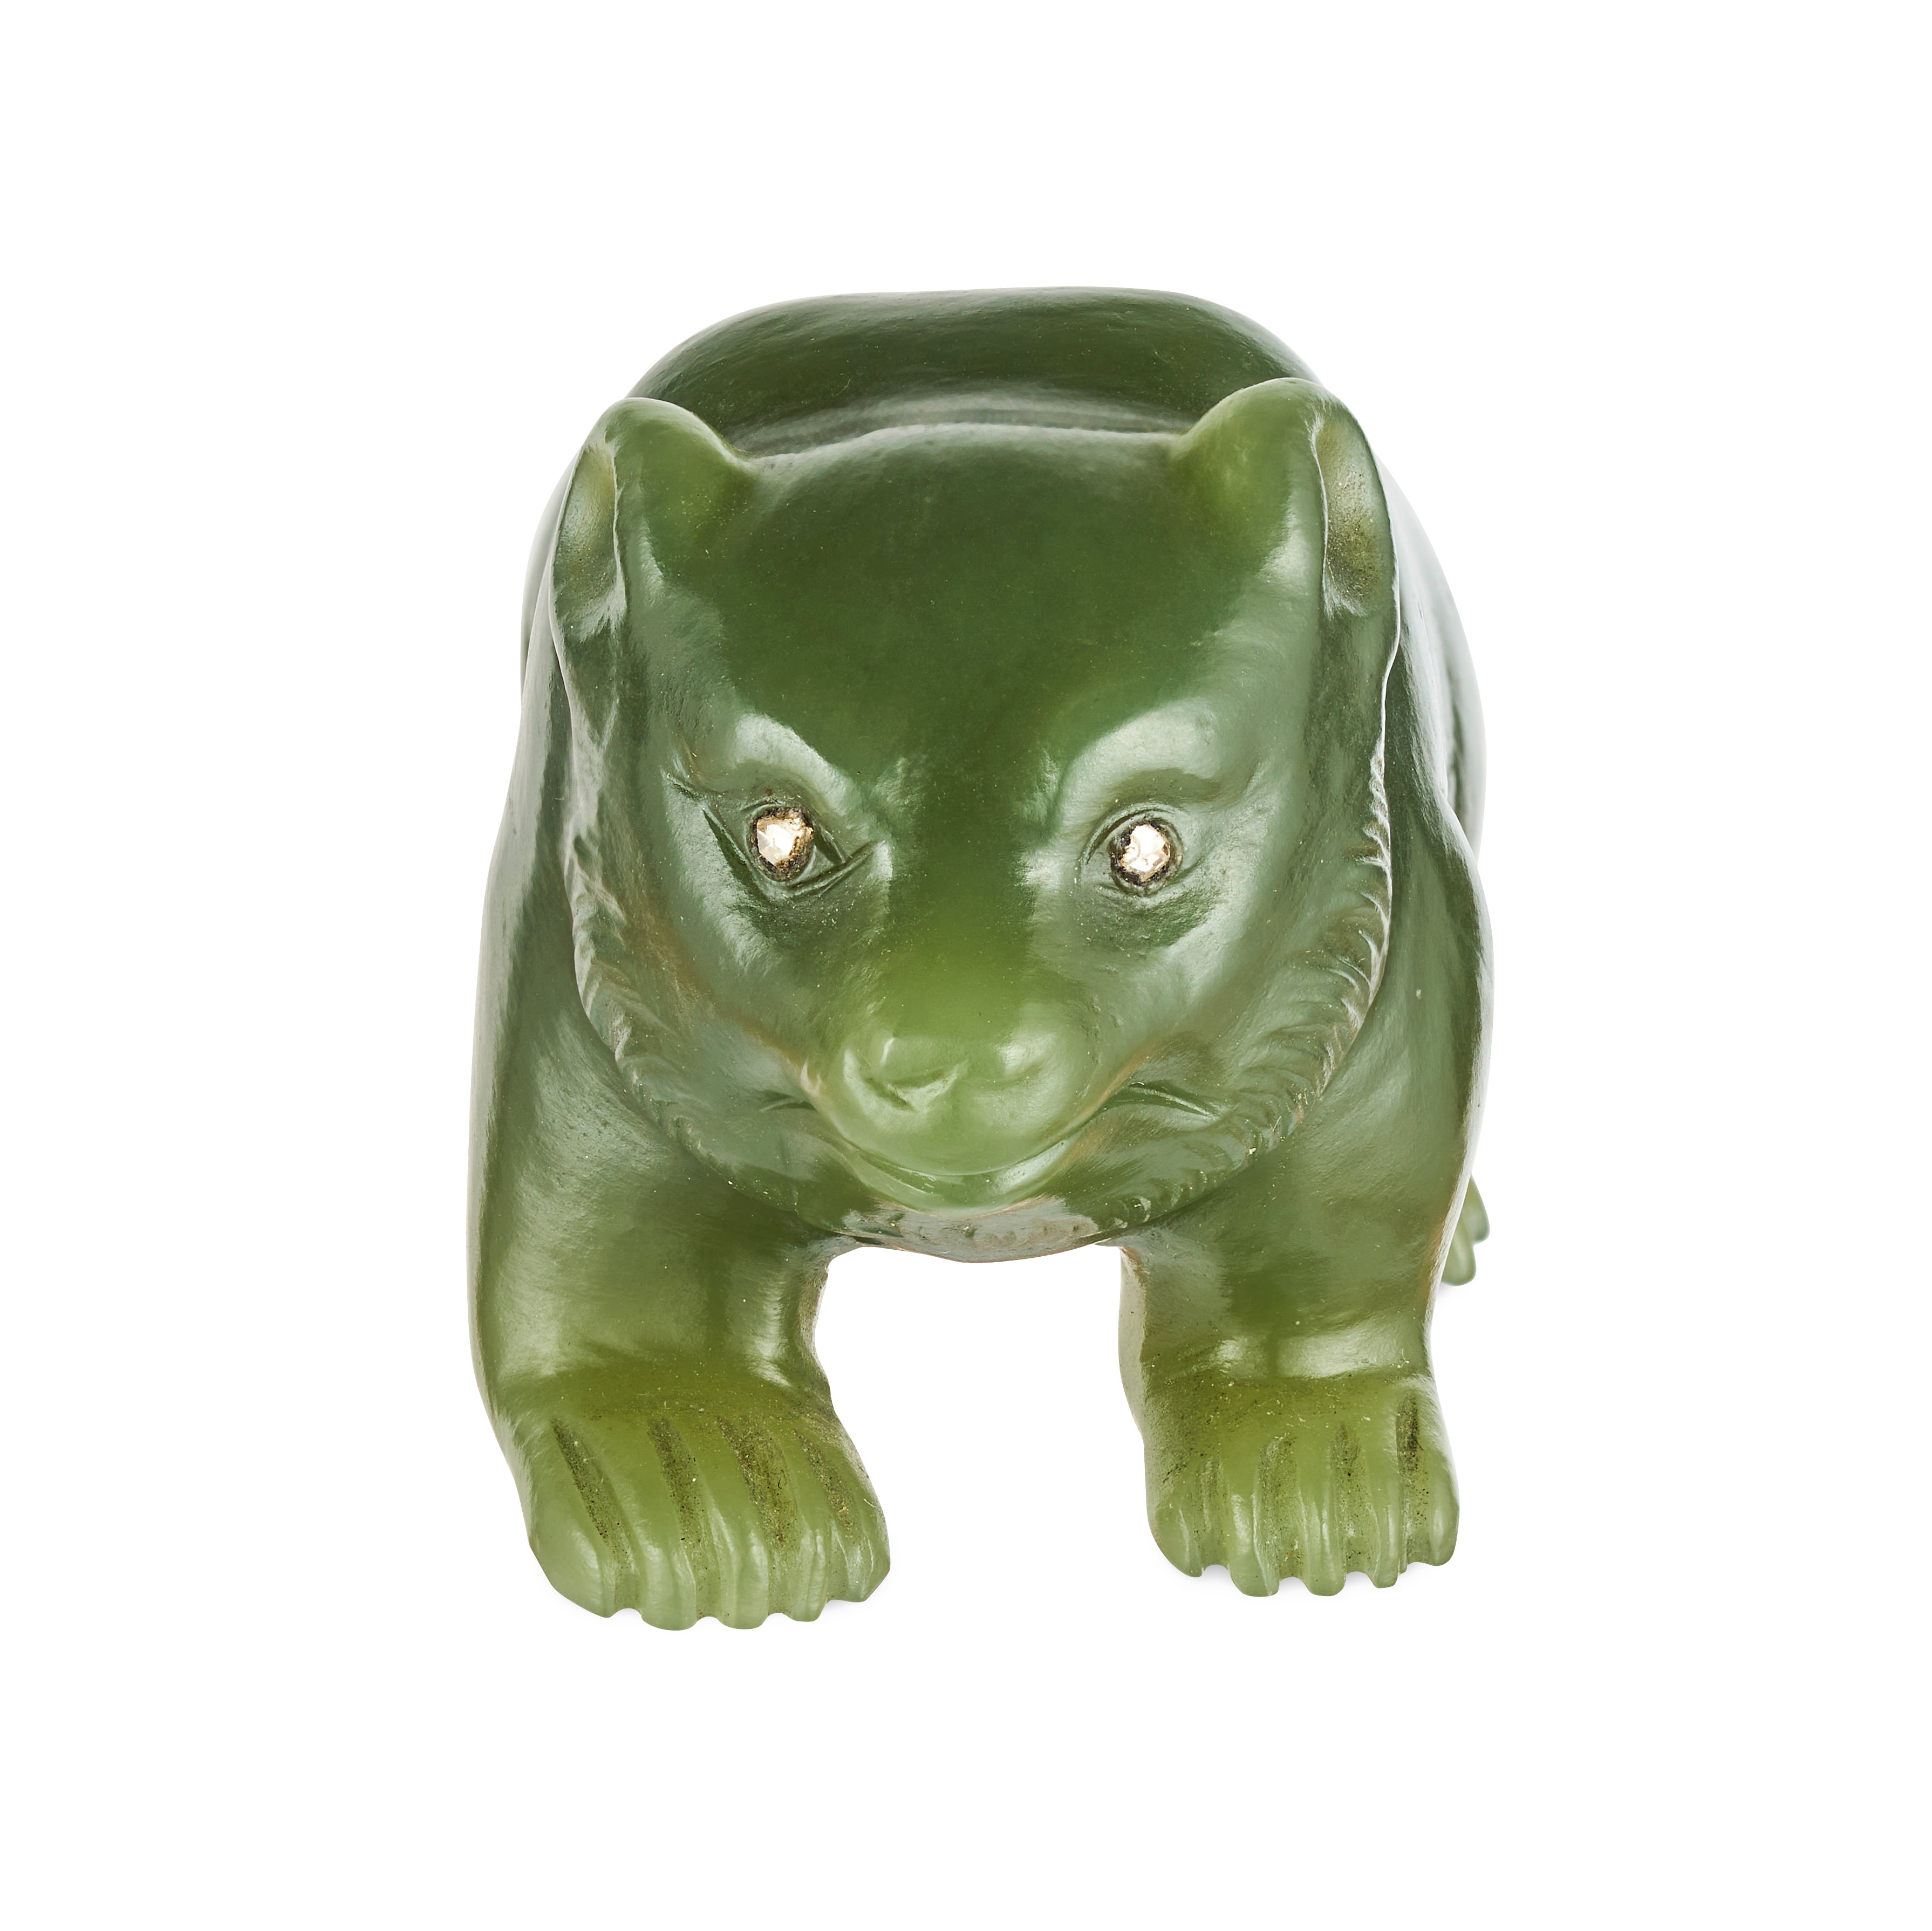 FABERGE, A JEWELLED NEPHRITE STUDY OF A BEAR, CIRCA 1905 - Image 3 of 6